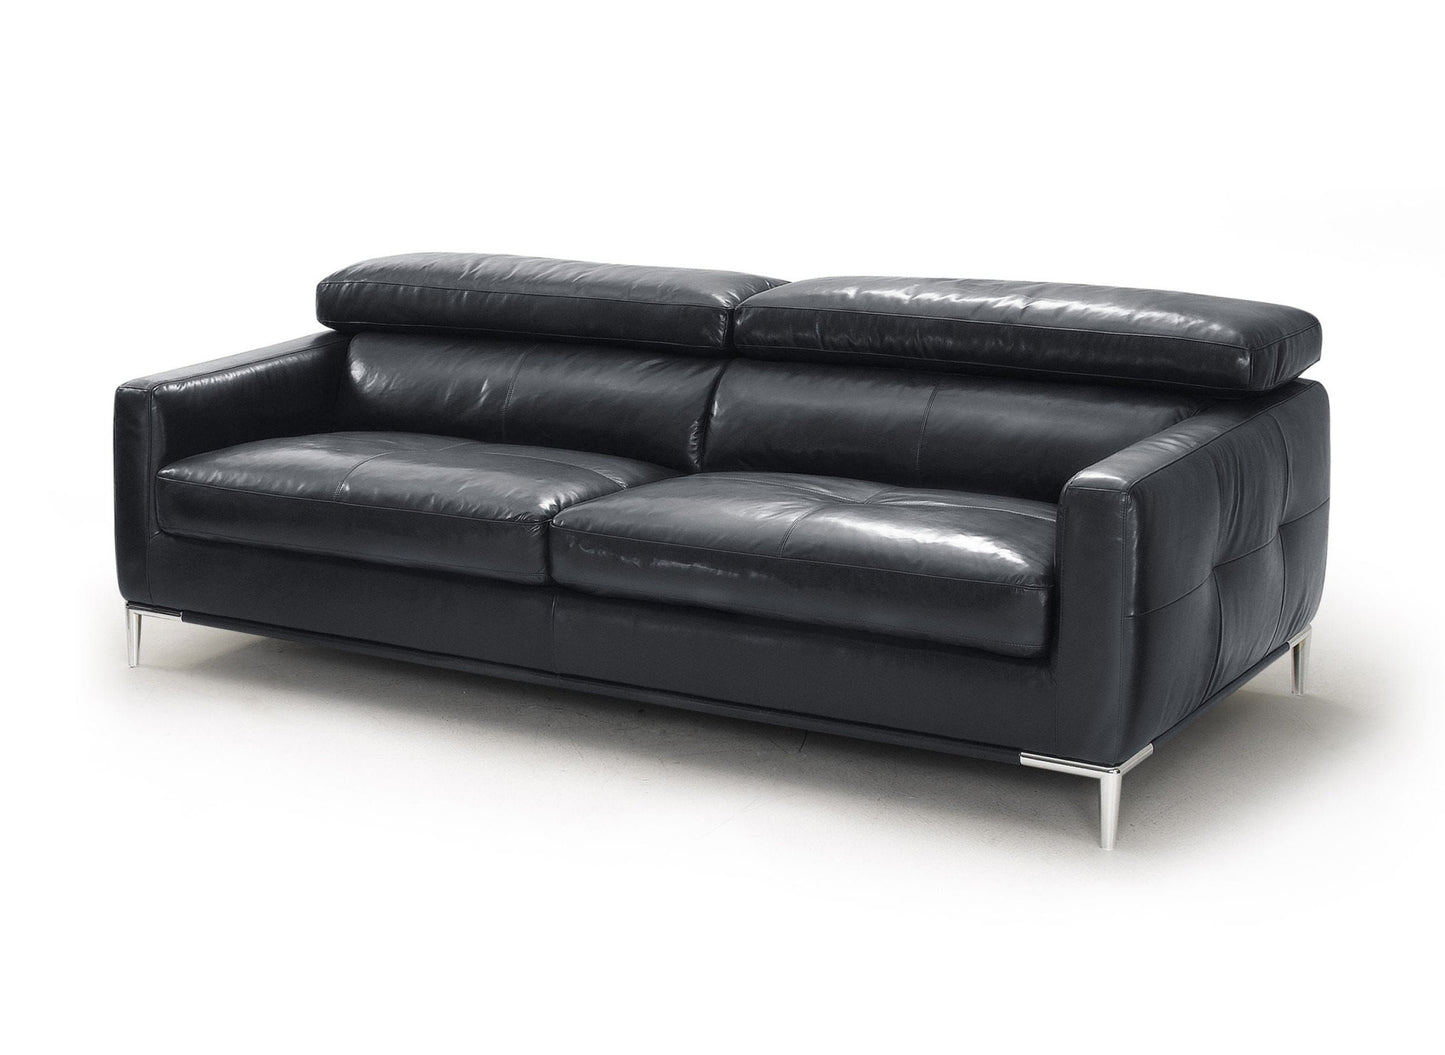 79" Black Genuine Leather Sofa With Silver Legs